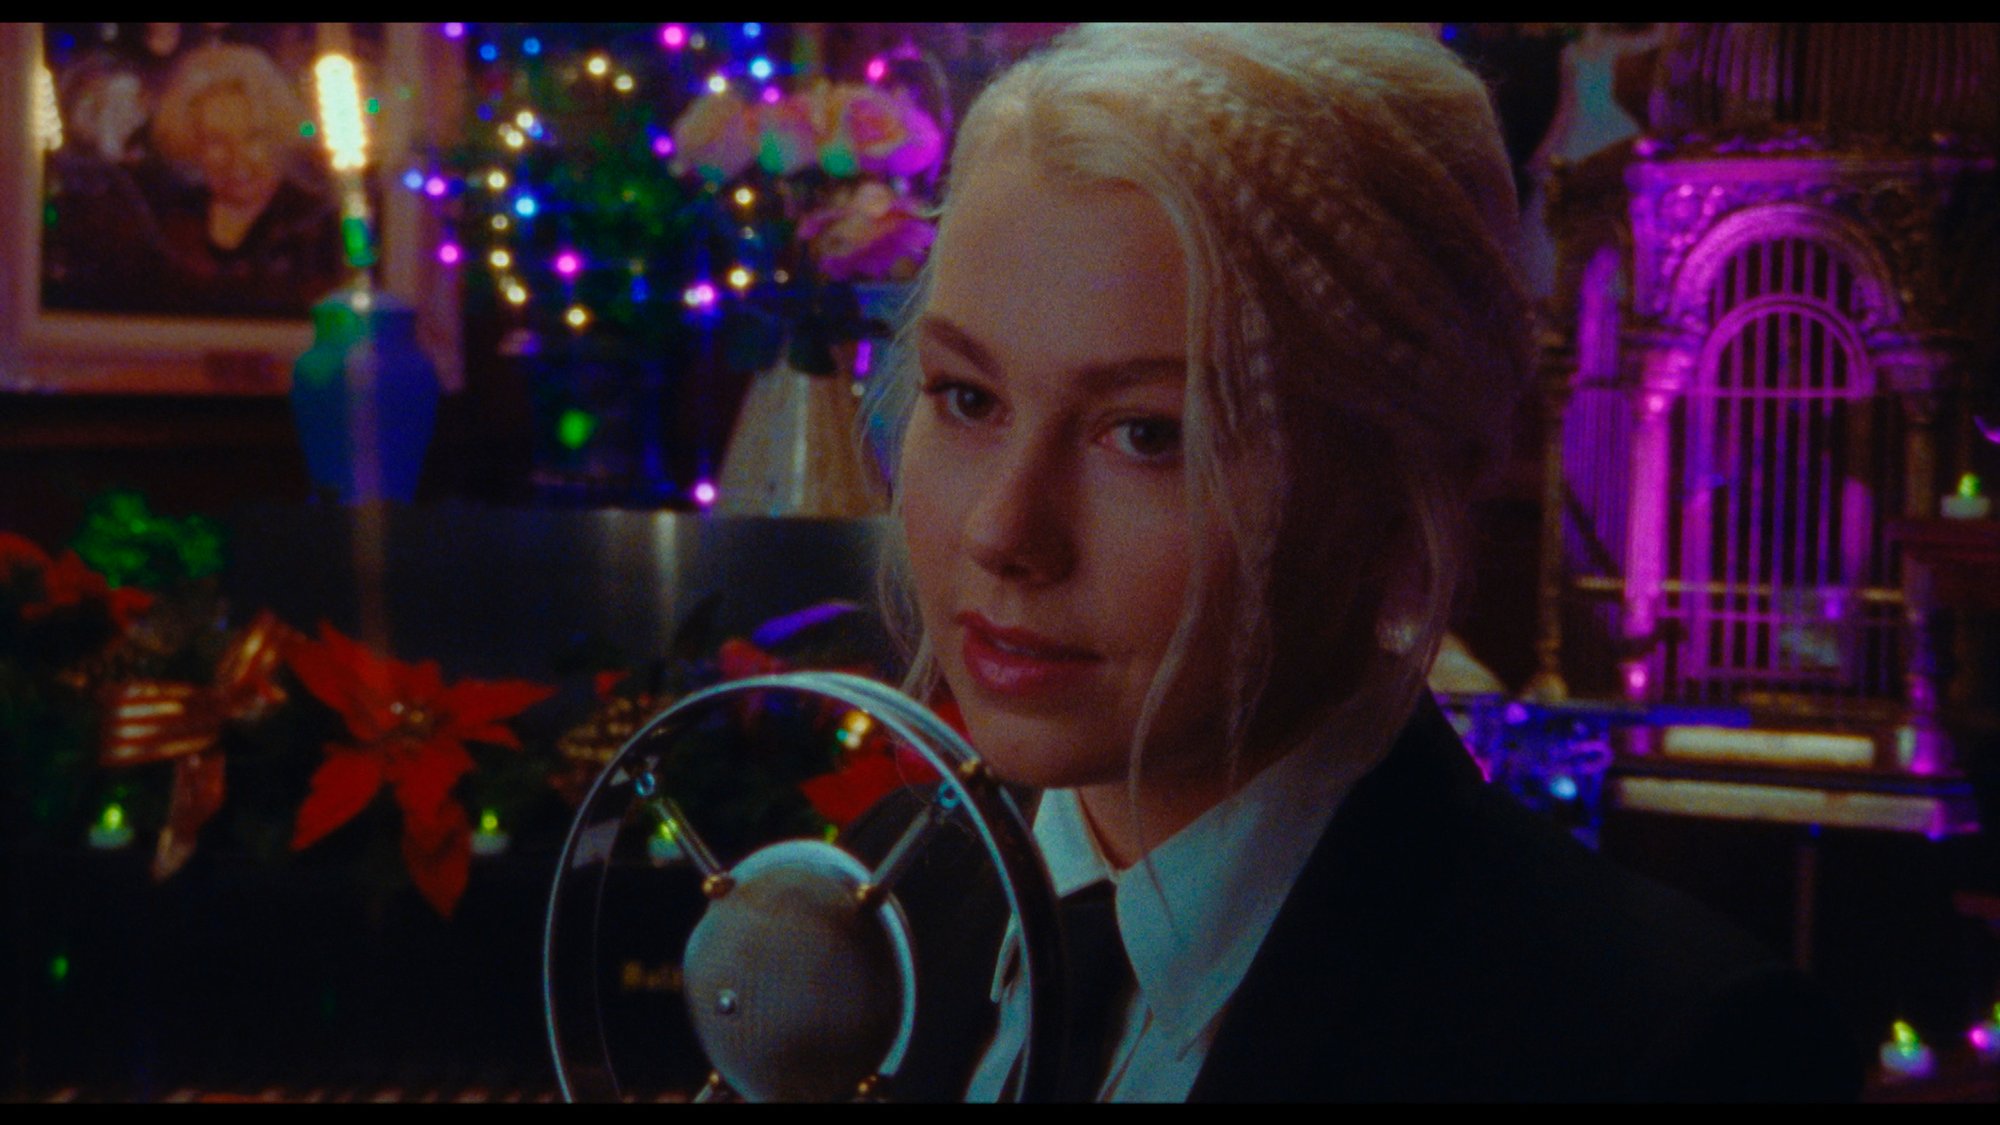 Phoebe Bridgers during her performance on 'THE TONIGHT SHOW STARRING JIMMY FALLON' on Dec. 2, 2020